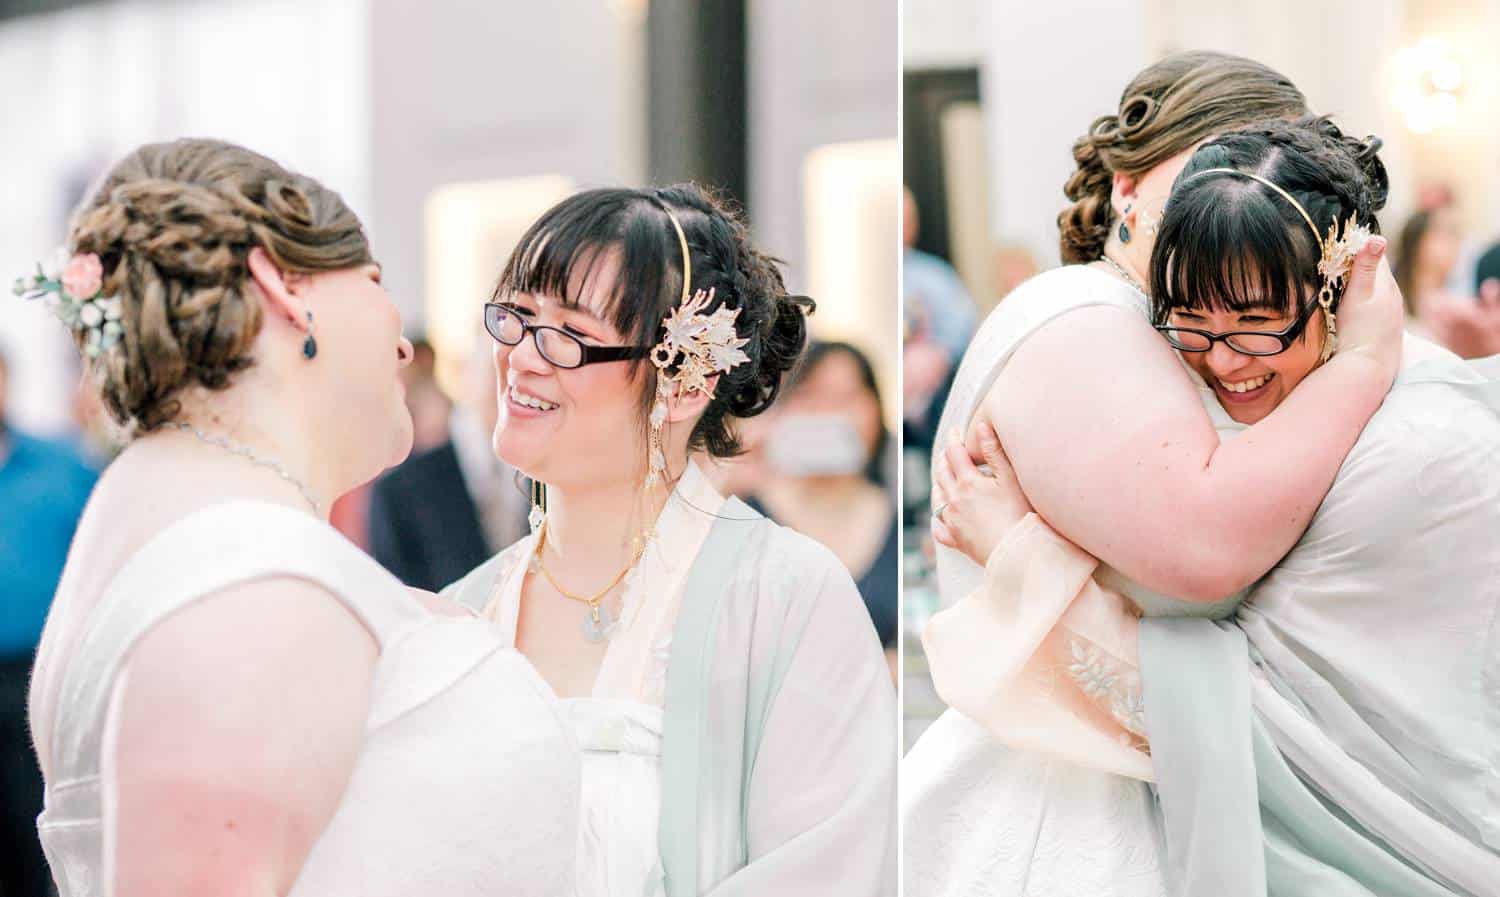 A two-photo series depicts two brides smiling and hugging during their first dance after their wedding.